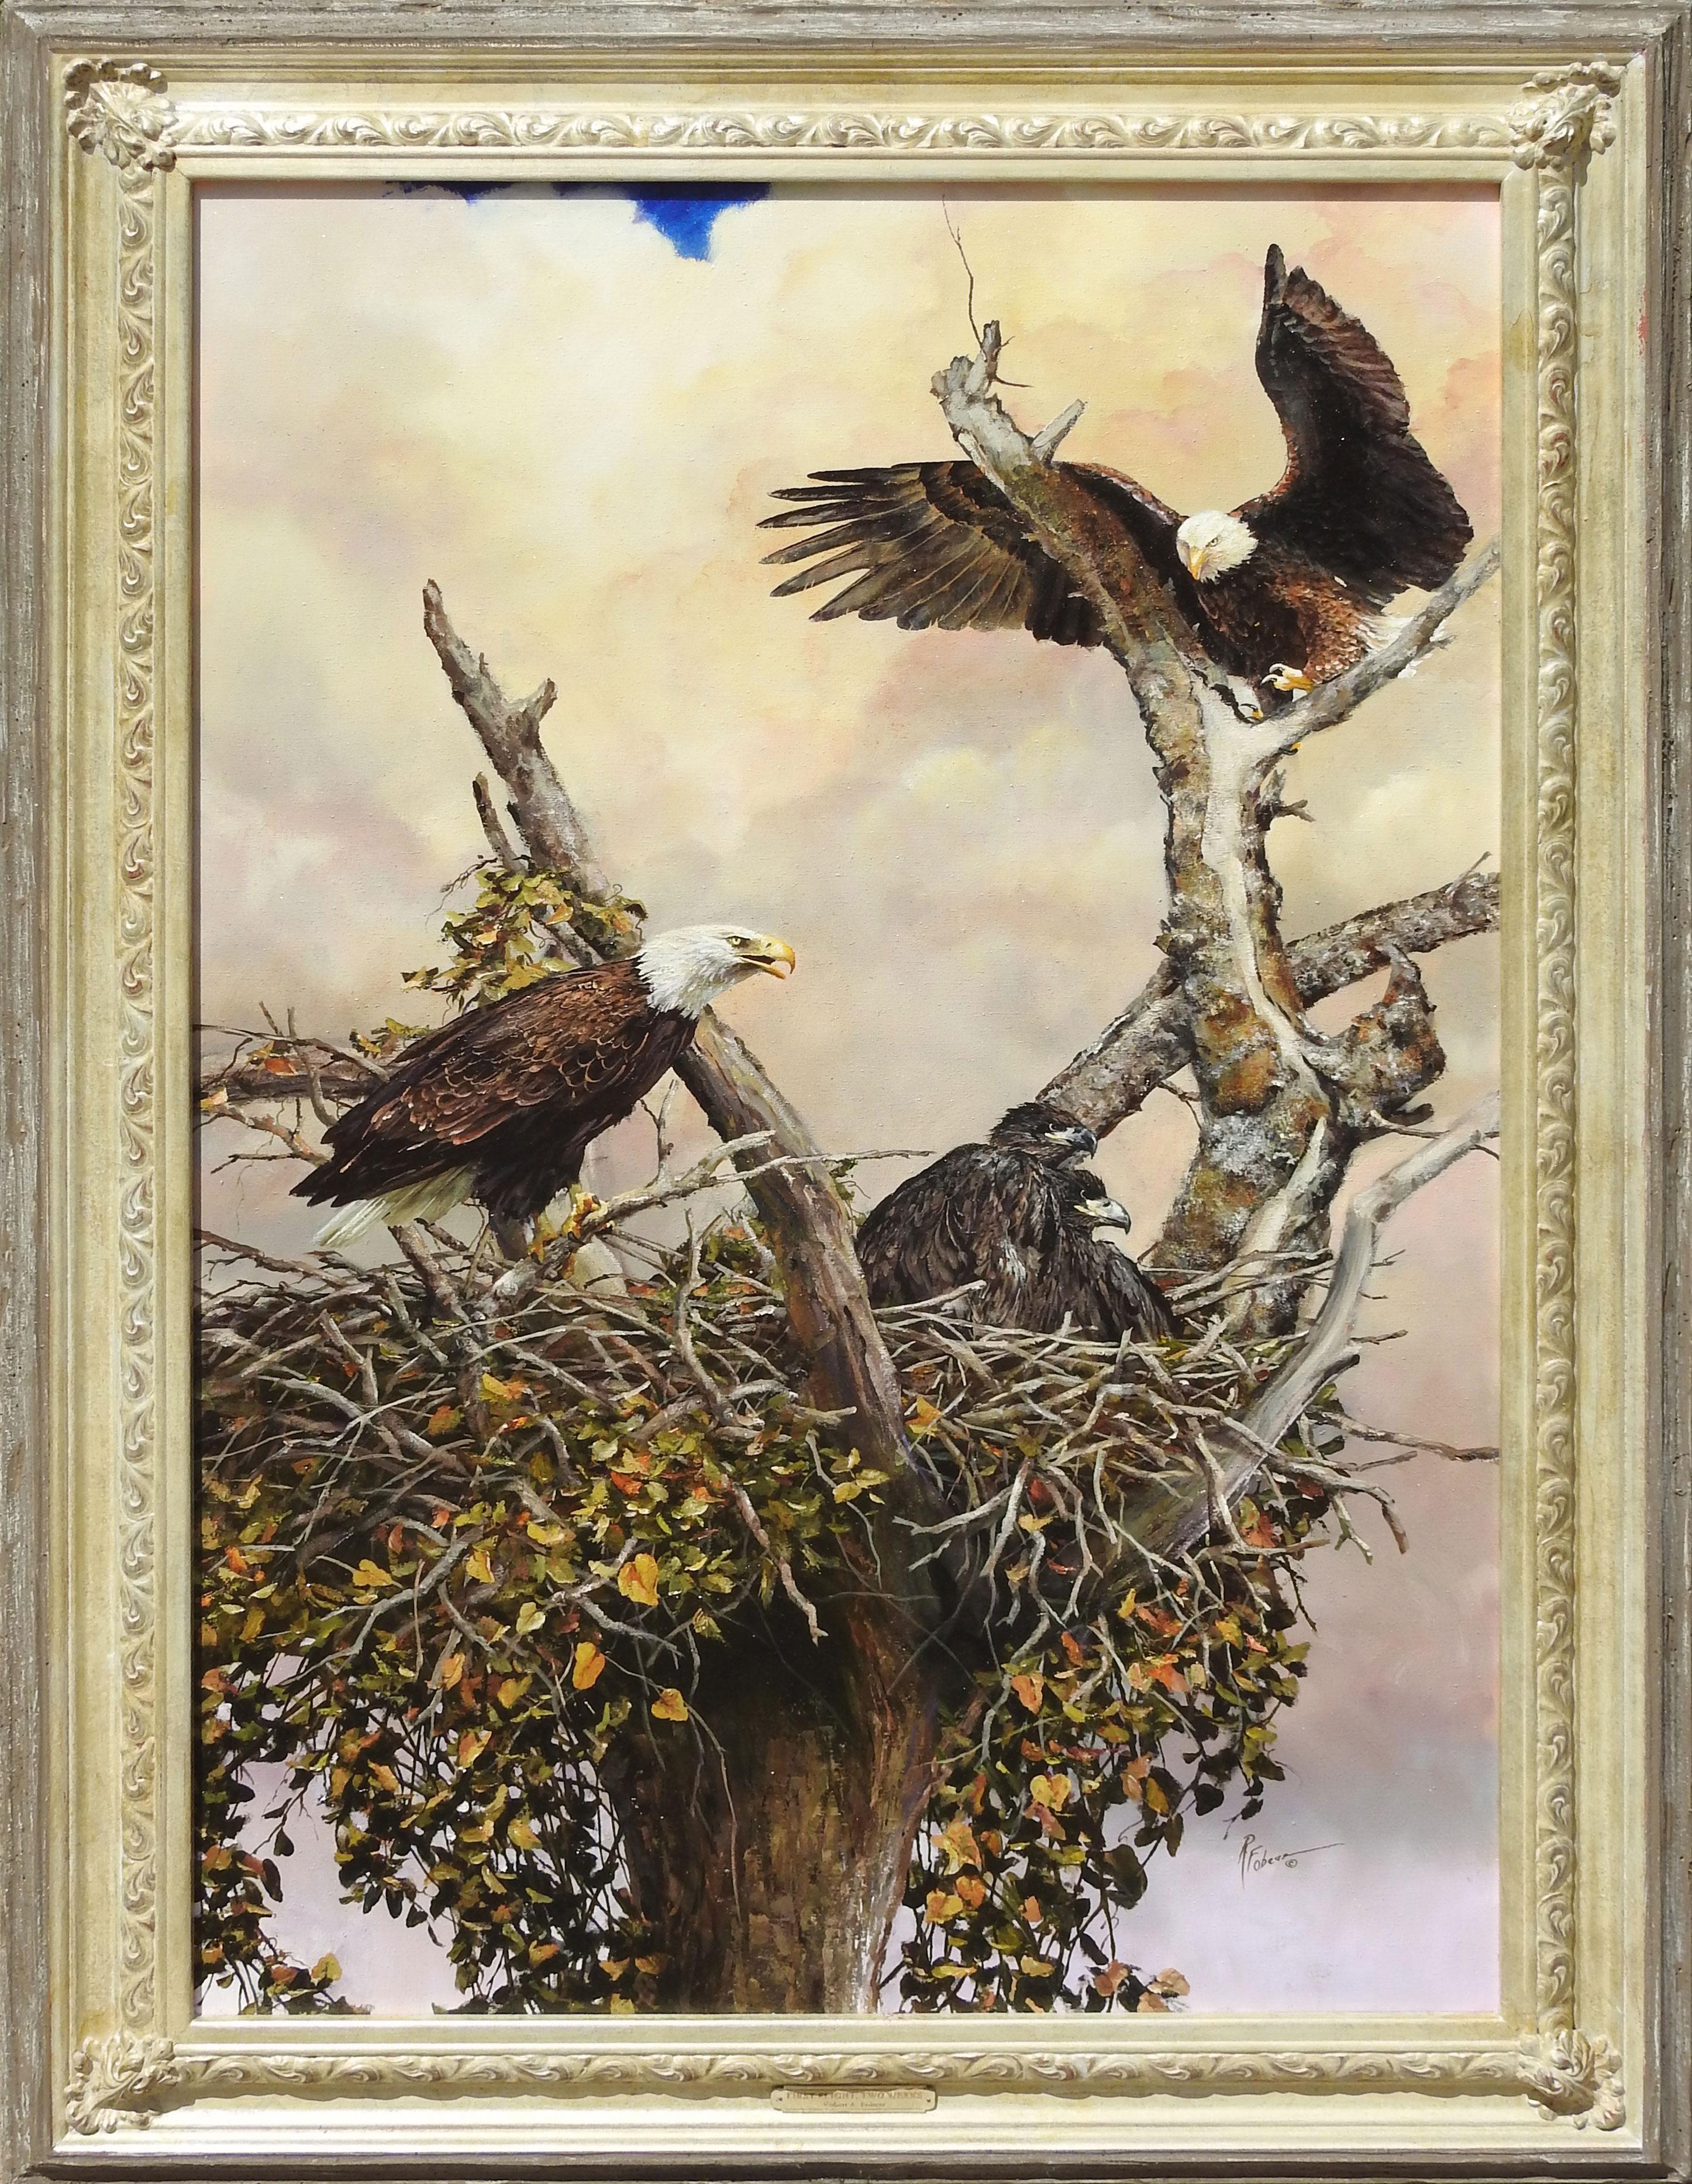 "First Flight, Two Weeks" is an original oil on linen painting by Texas Artist Robert Fobear and measures 40x60 inches. This extraordinary piece captures a mesmerizing autumn scene, where two majestic eagles perch high up in a tree, keeping a